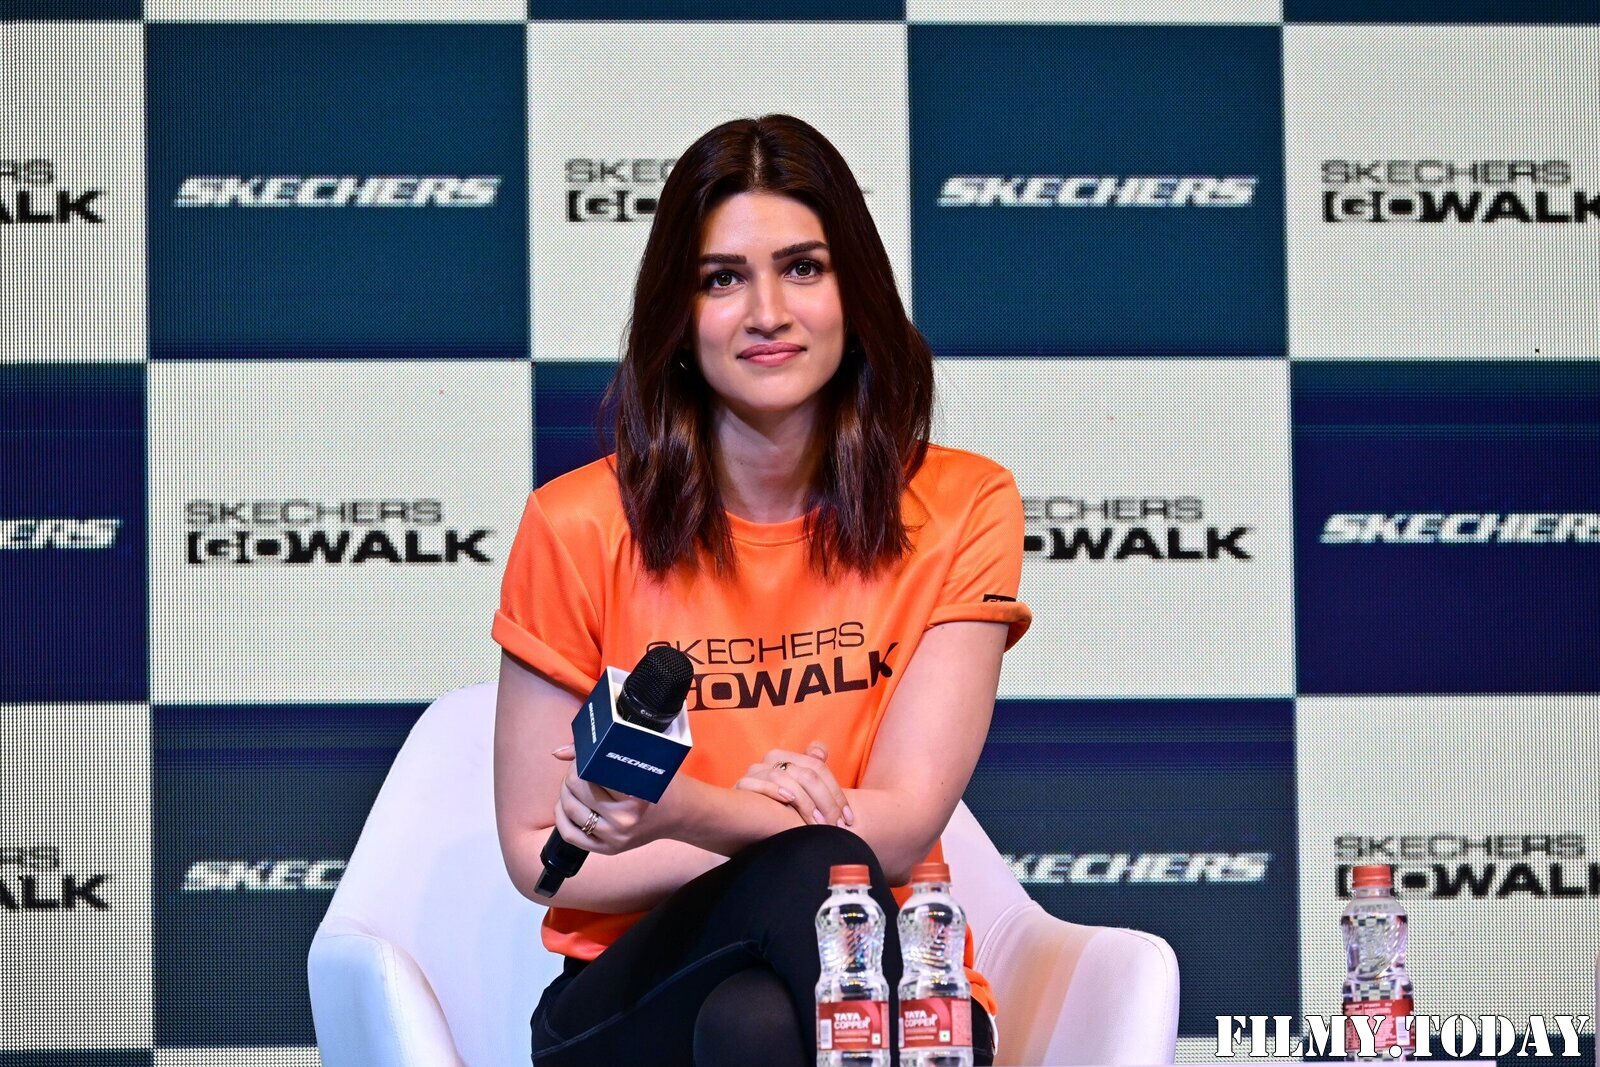 Photos: Kriti Sanon At The Press Conference Of 4th Edition Of The Skechers Walkathon | Picture 1940184